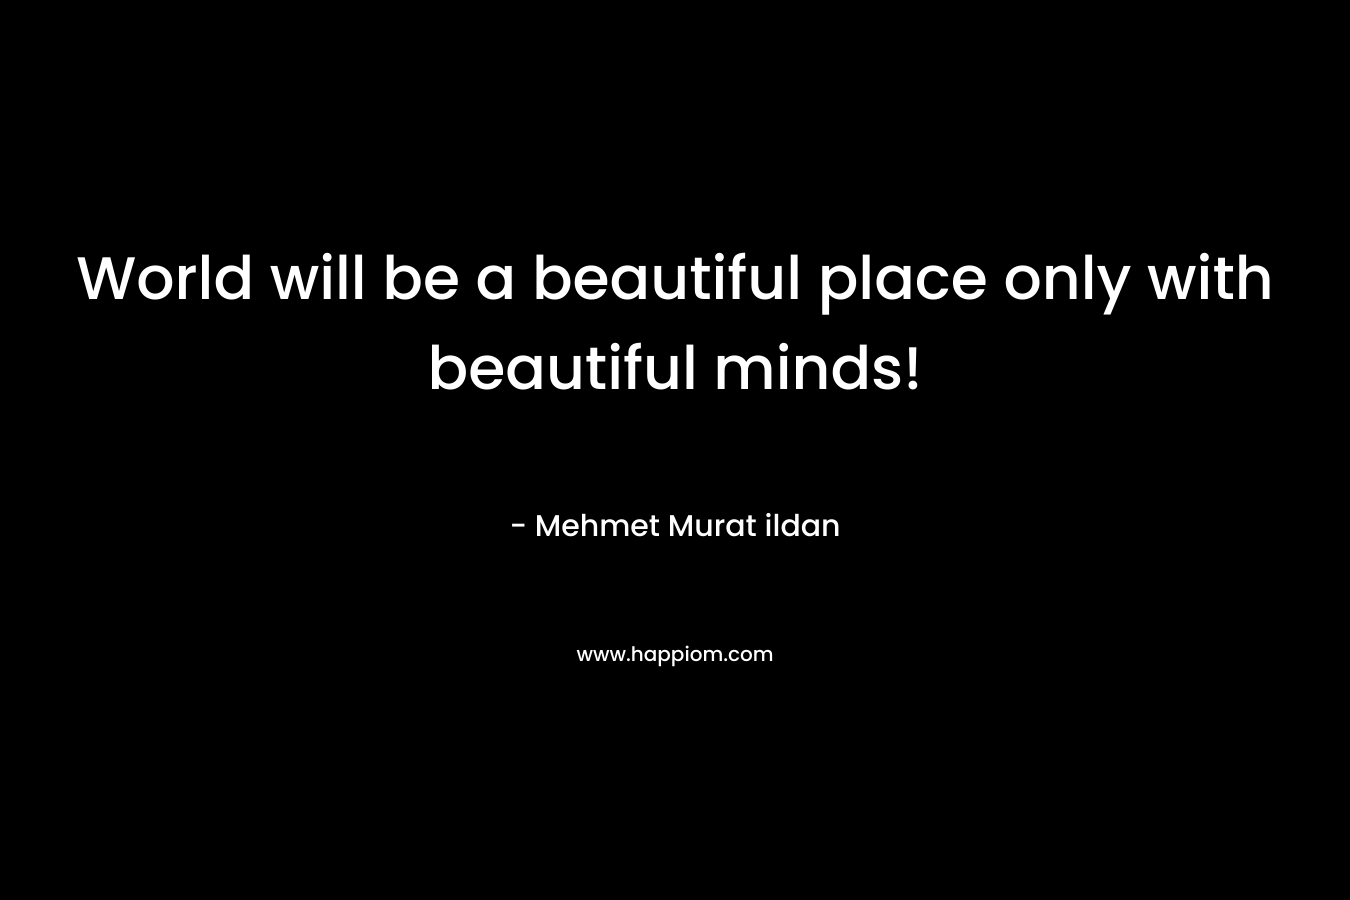 World will be a beautiful place only with beautiful minds!